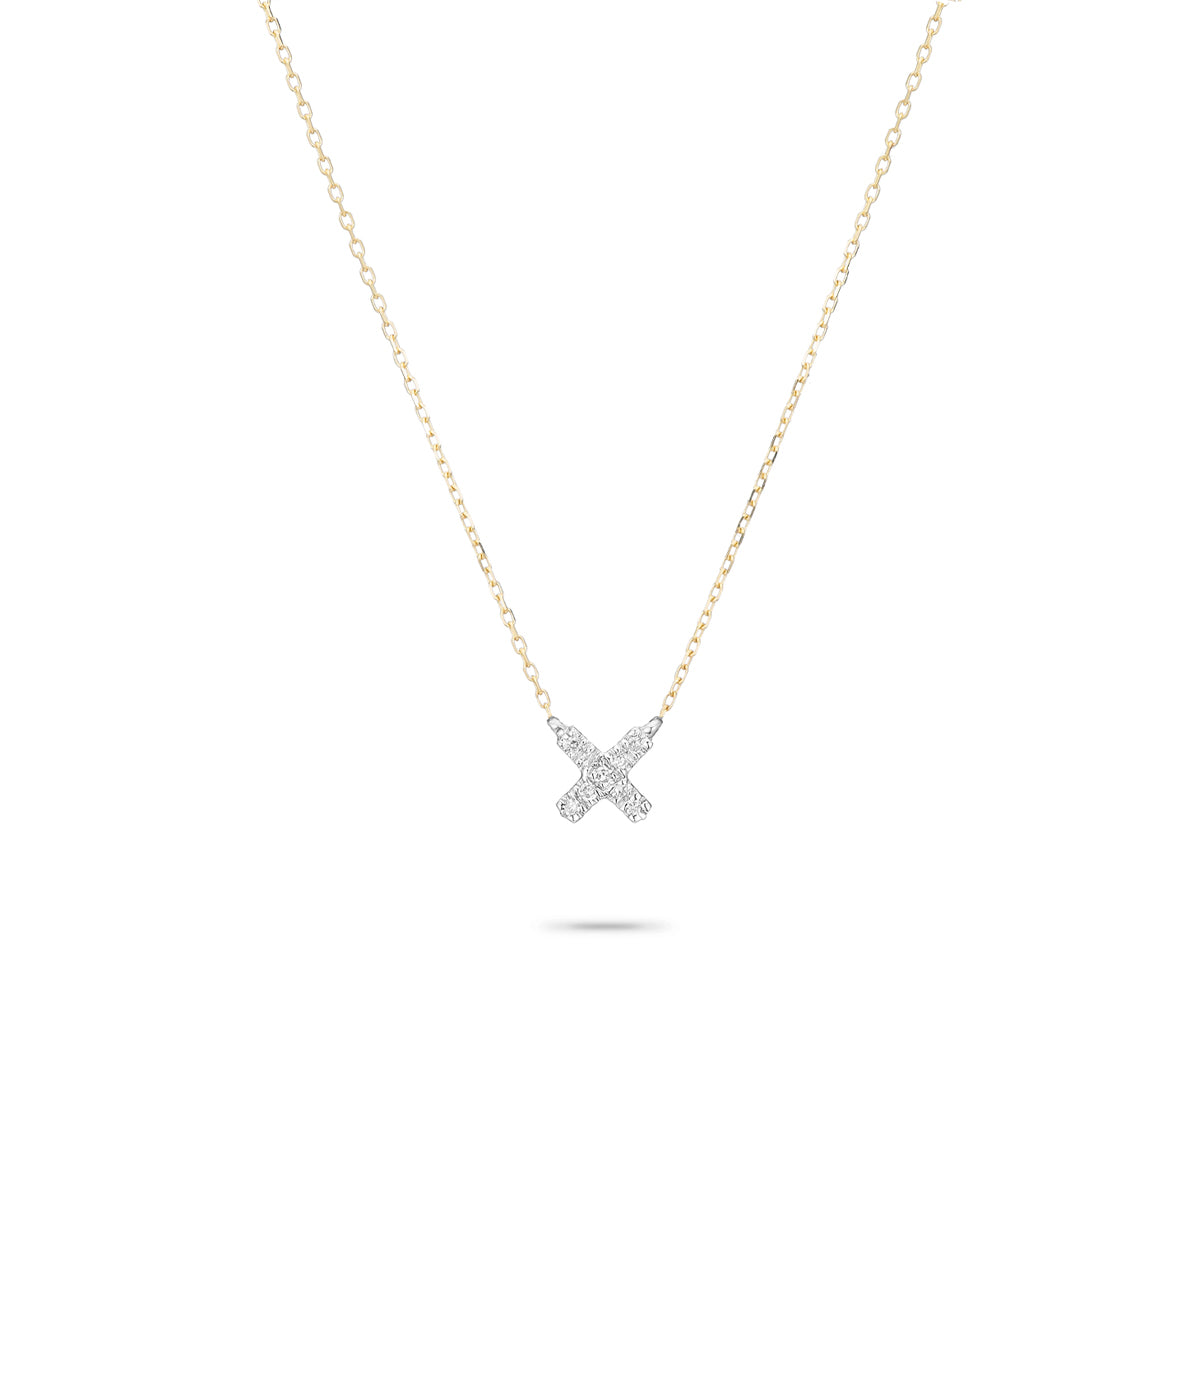 Super Tiny X Necklace in Yellow Gold